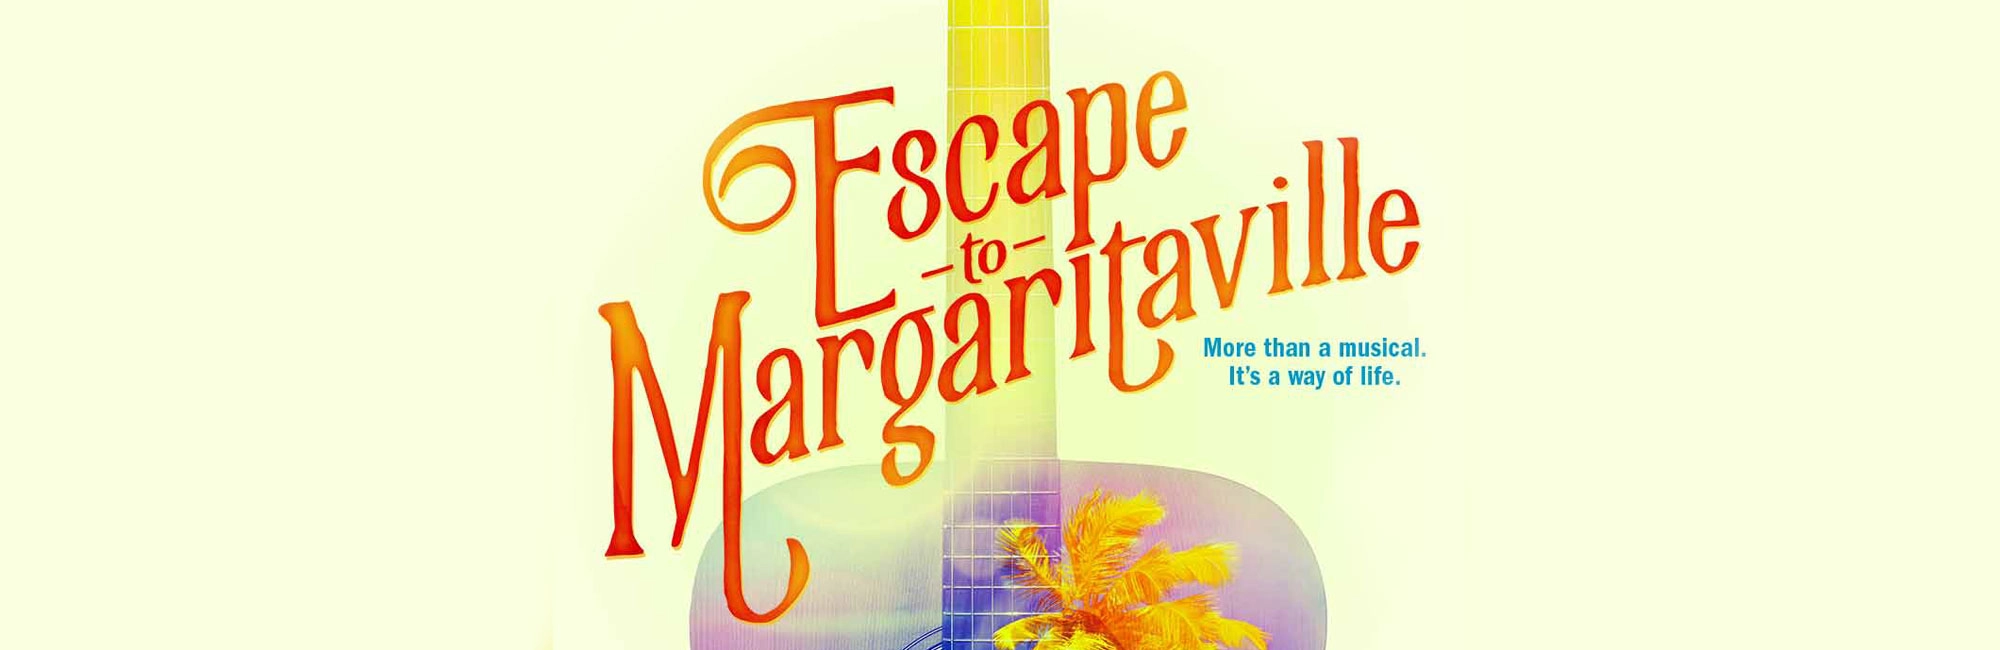 Catch Escape to Margaritaville before it’s too Late